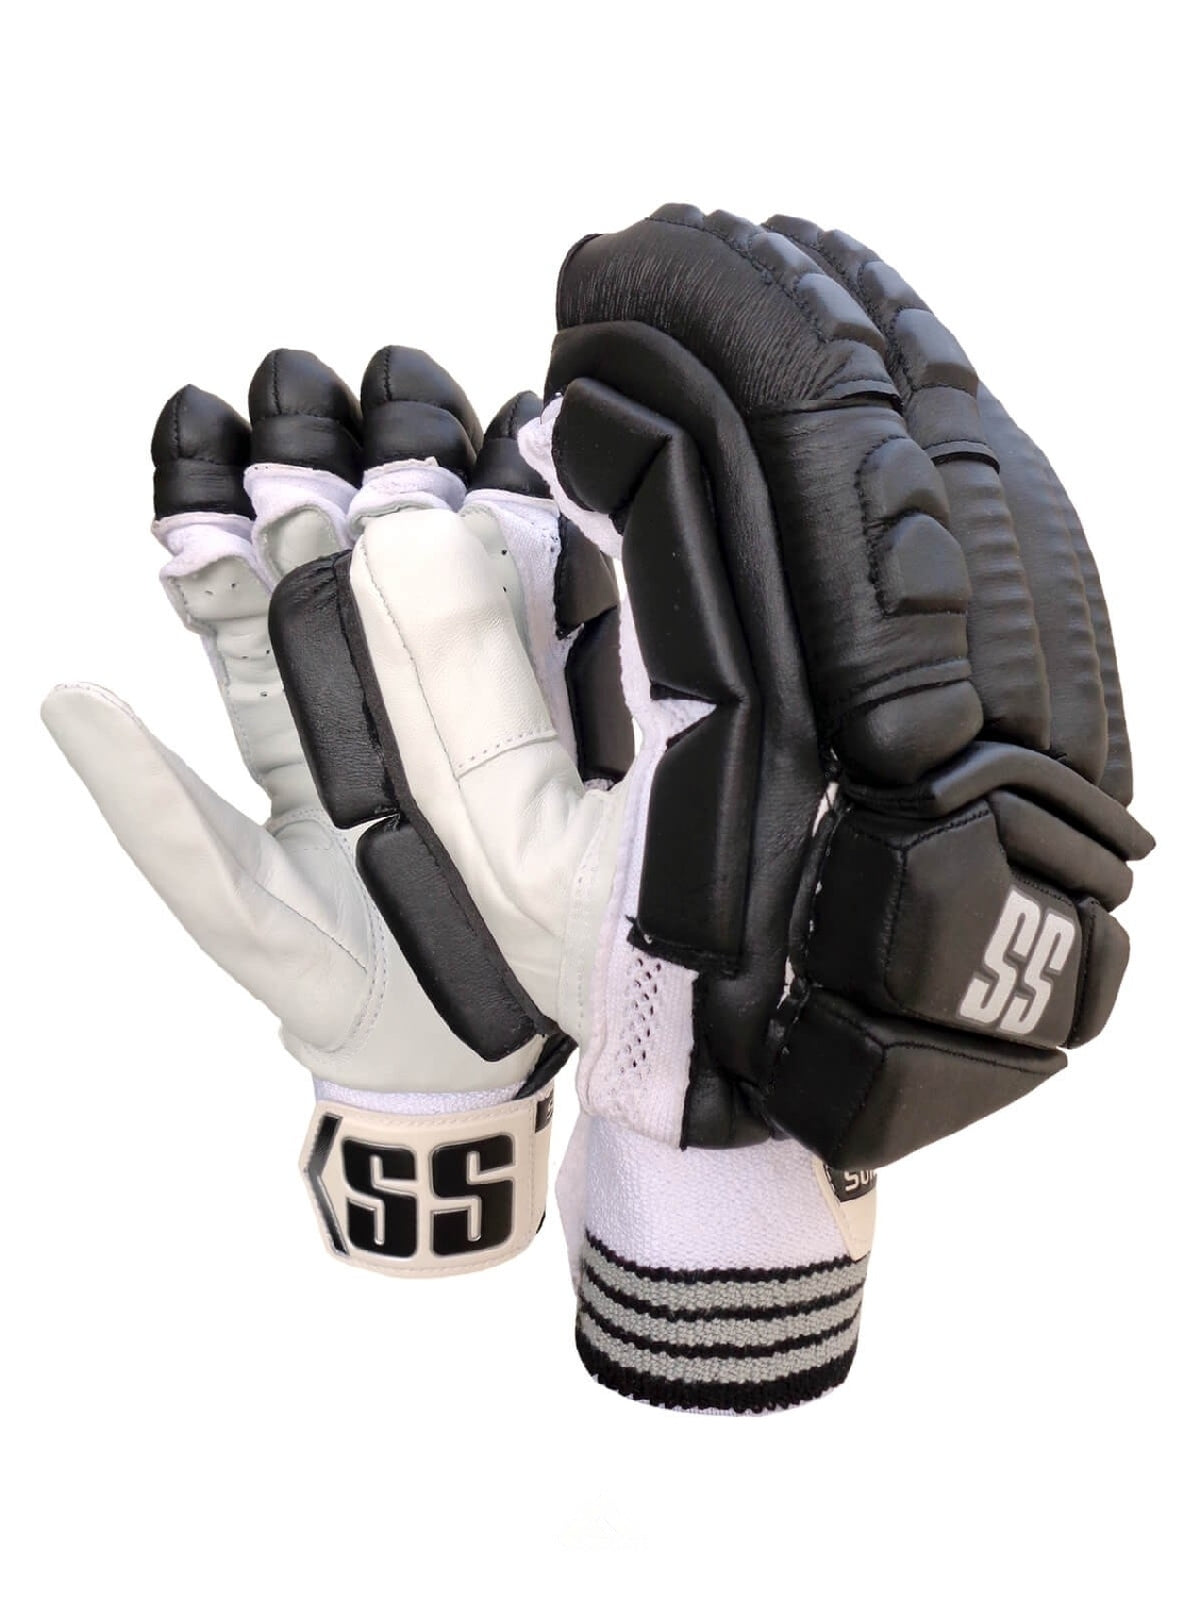 E4 Extreme Edition Black with Gold Batting Gloves- 2023